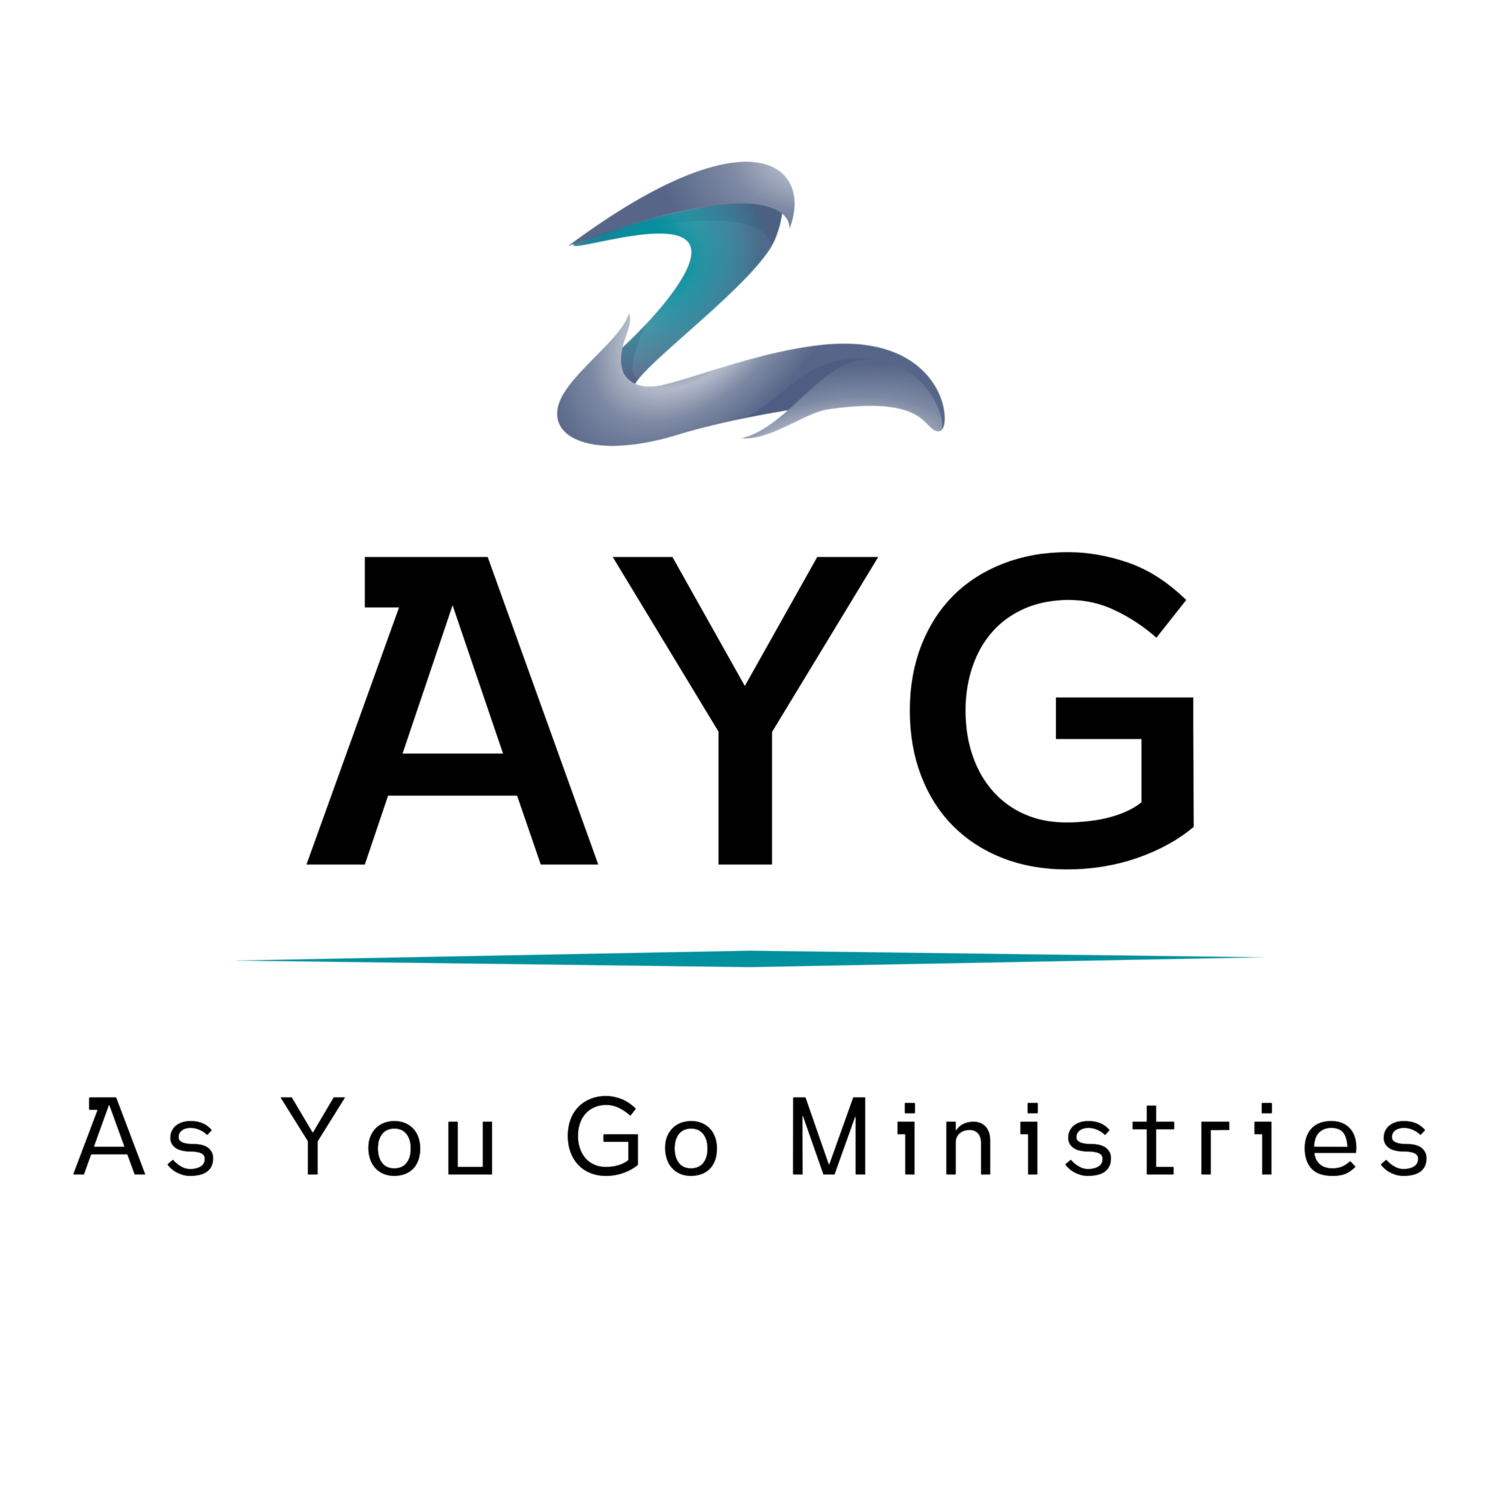 As You Go Ministries